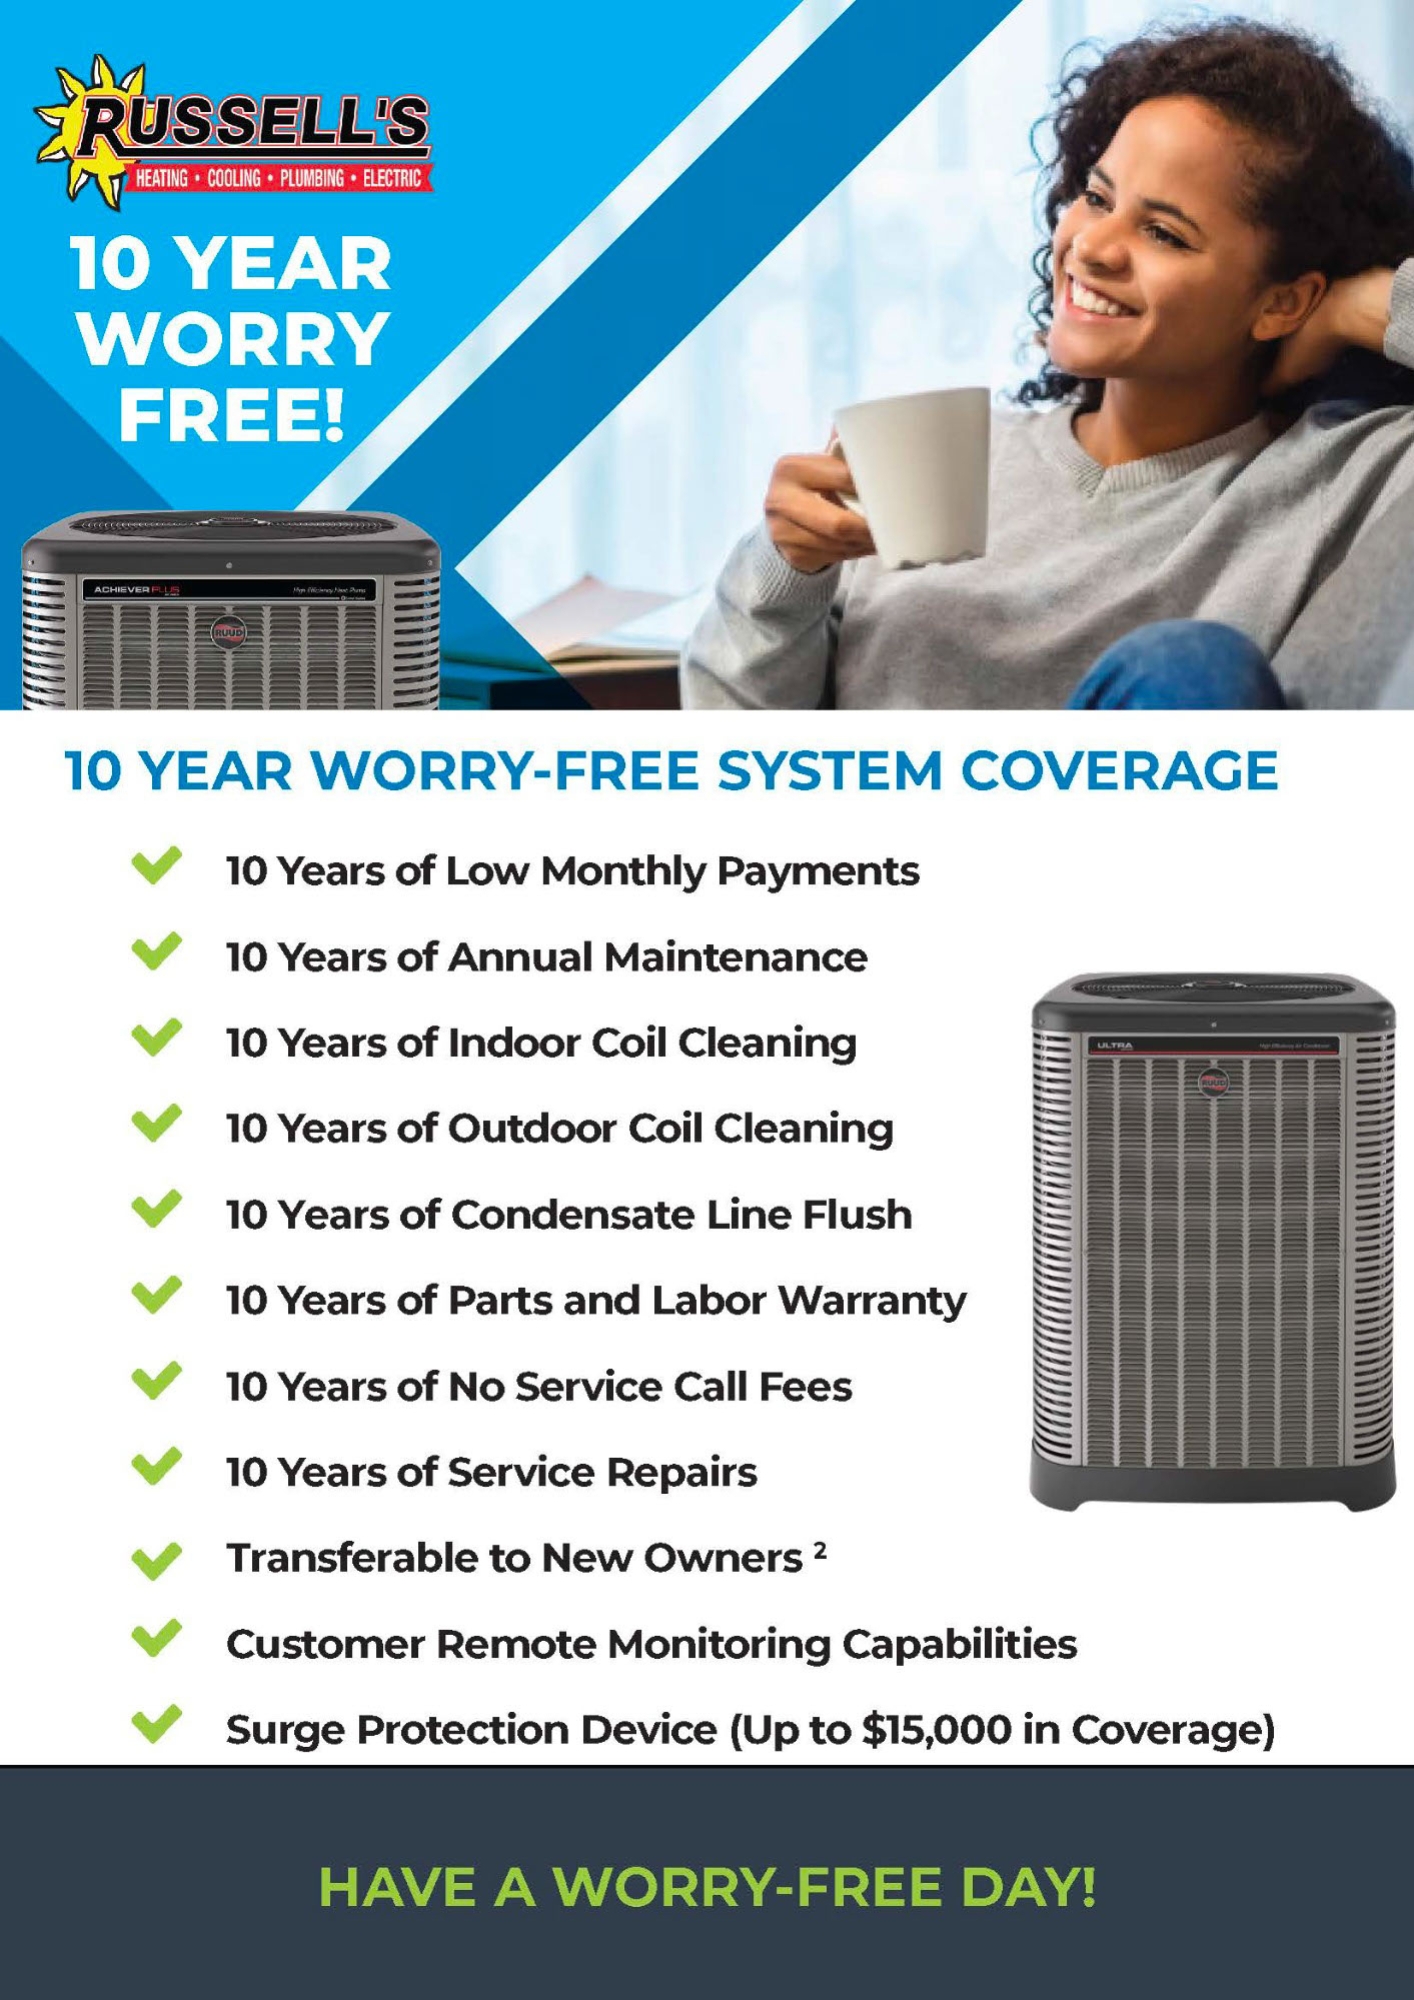 Russell's 10 Year Worry-Free System Coverage